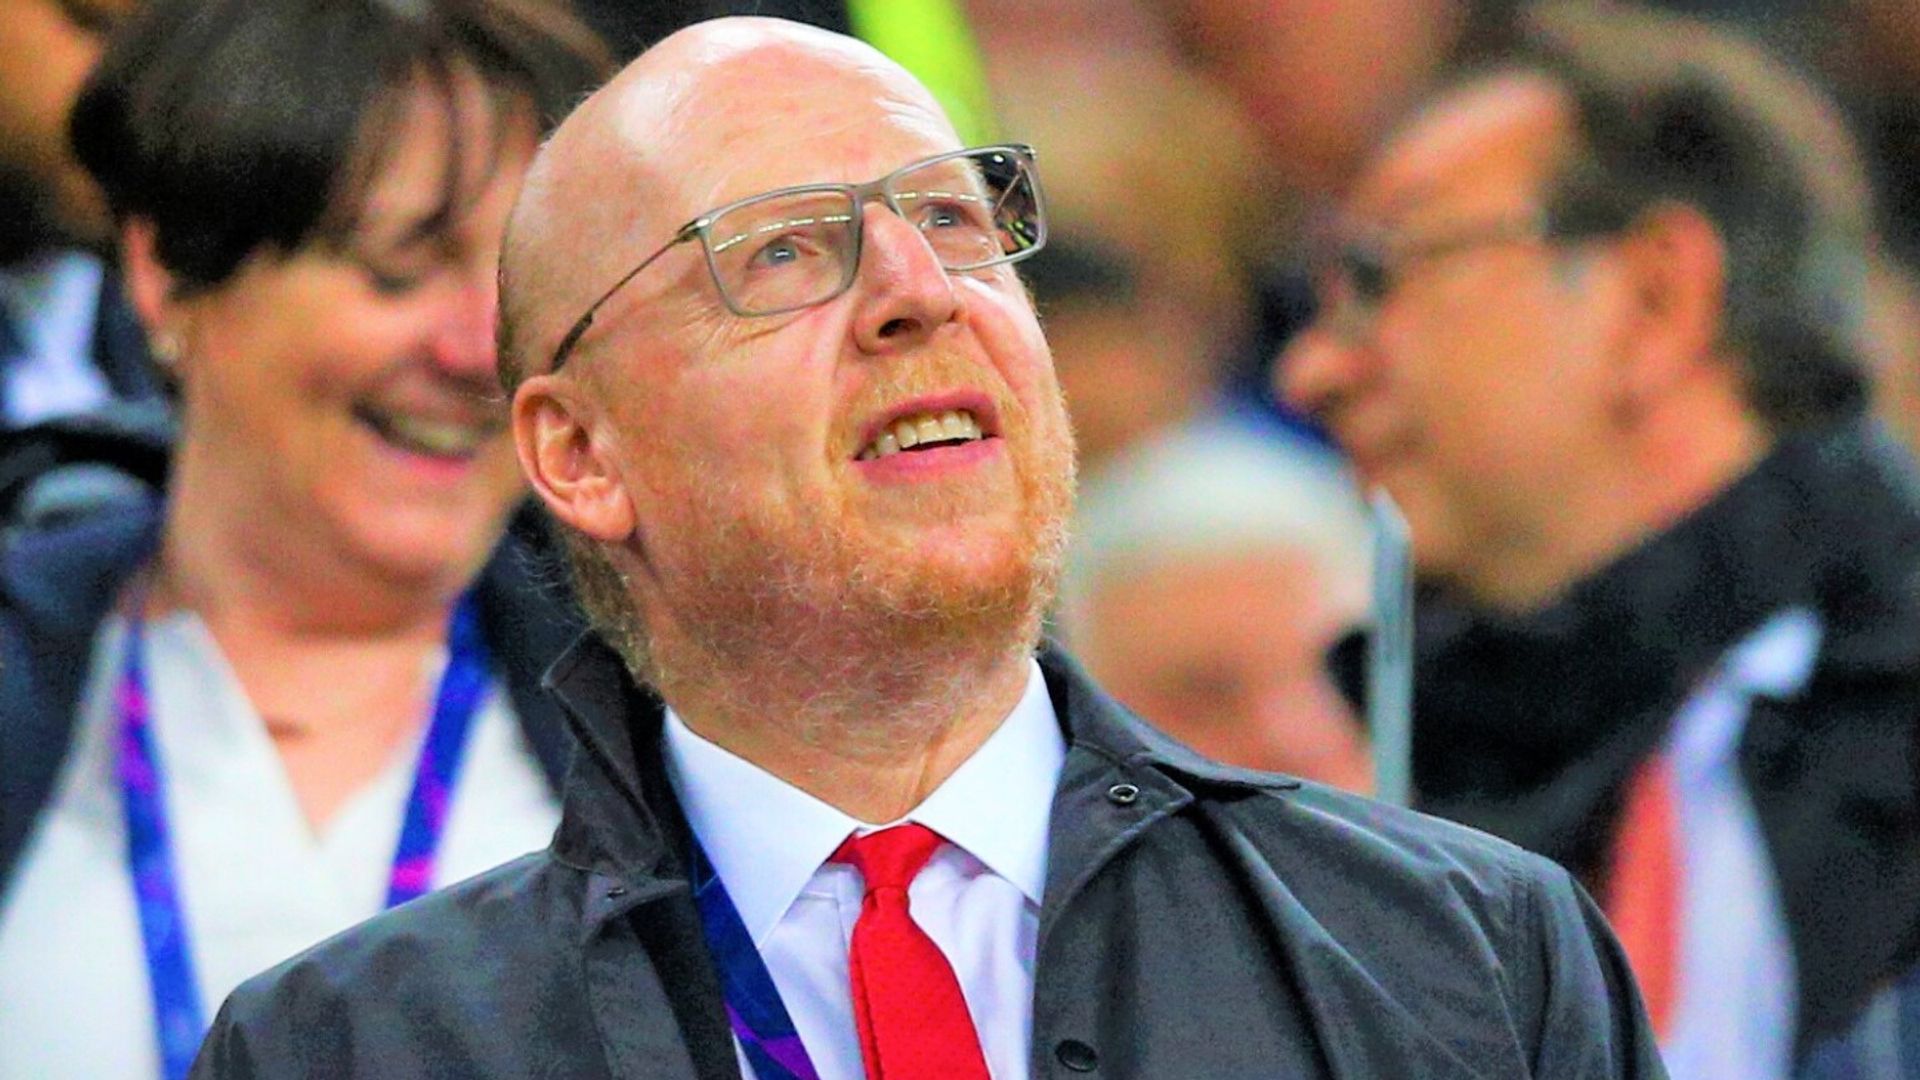 News: Glazers 'not ready to sell Utd', says Ratcliffe